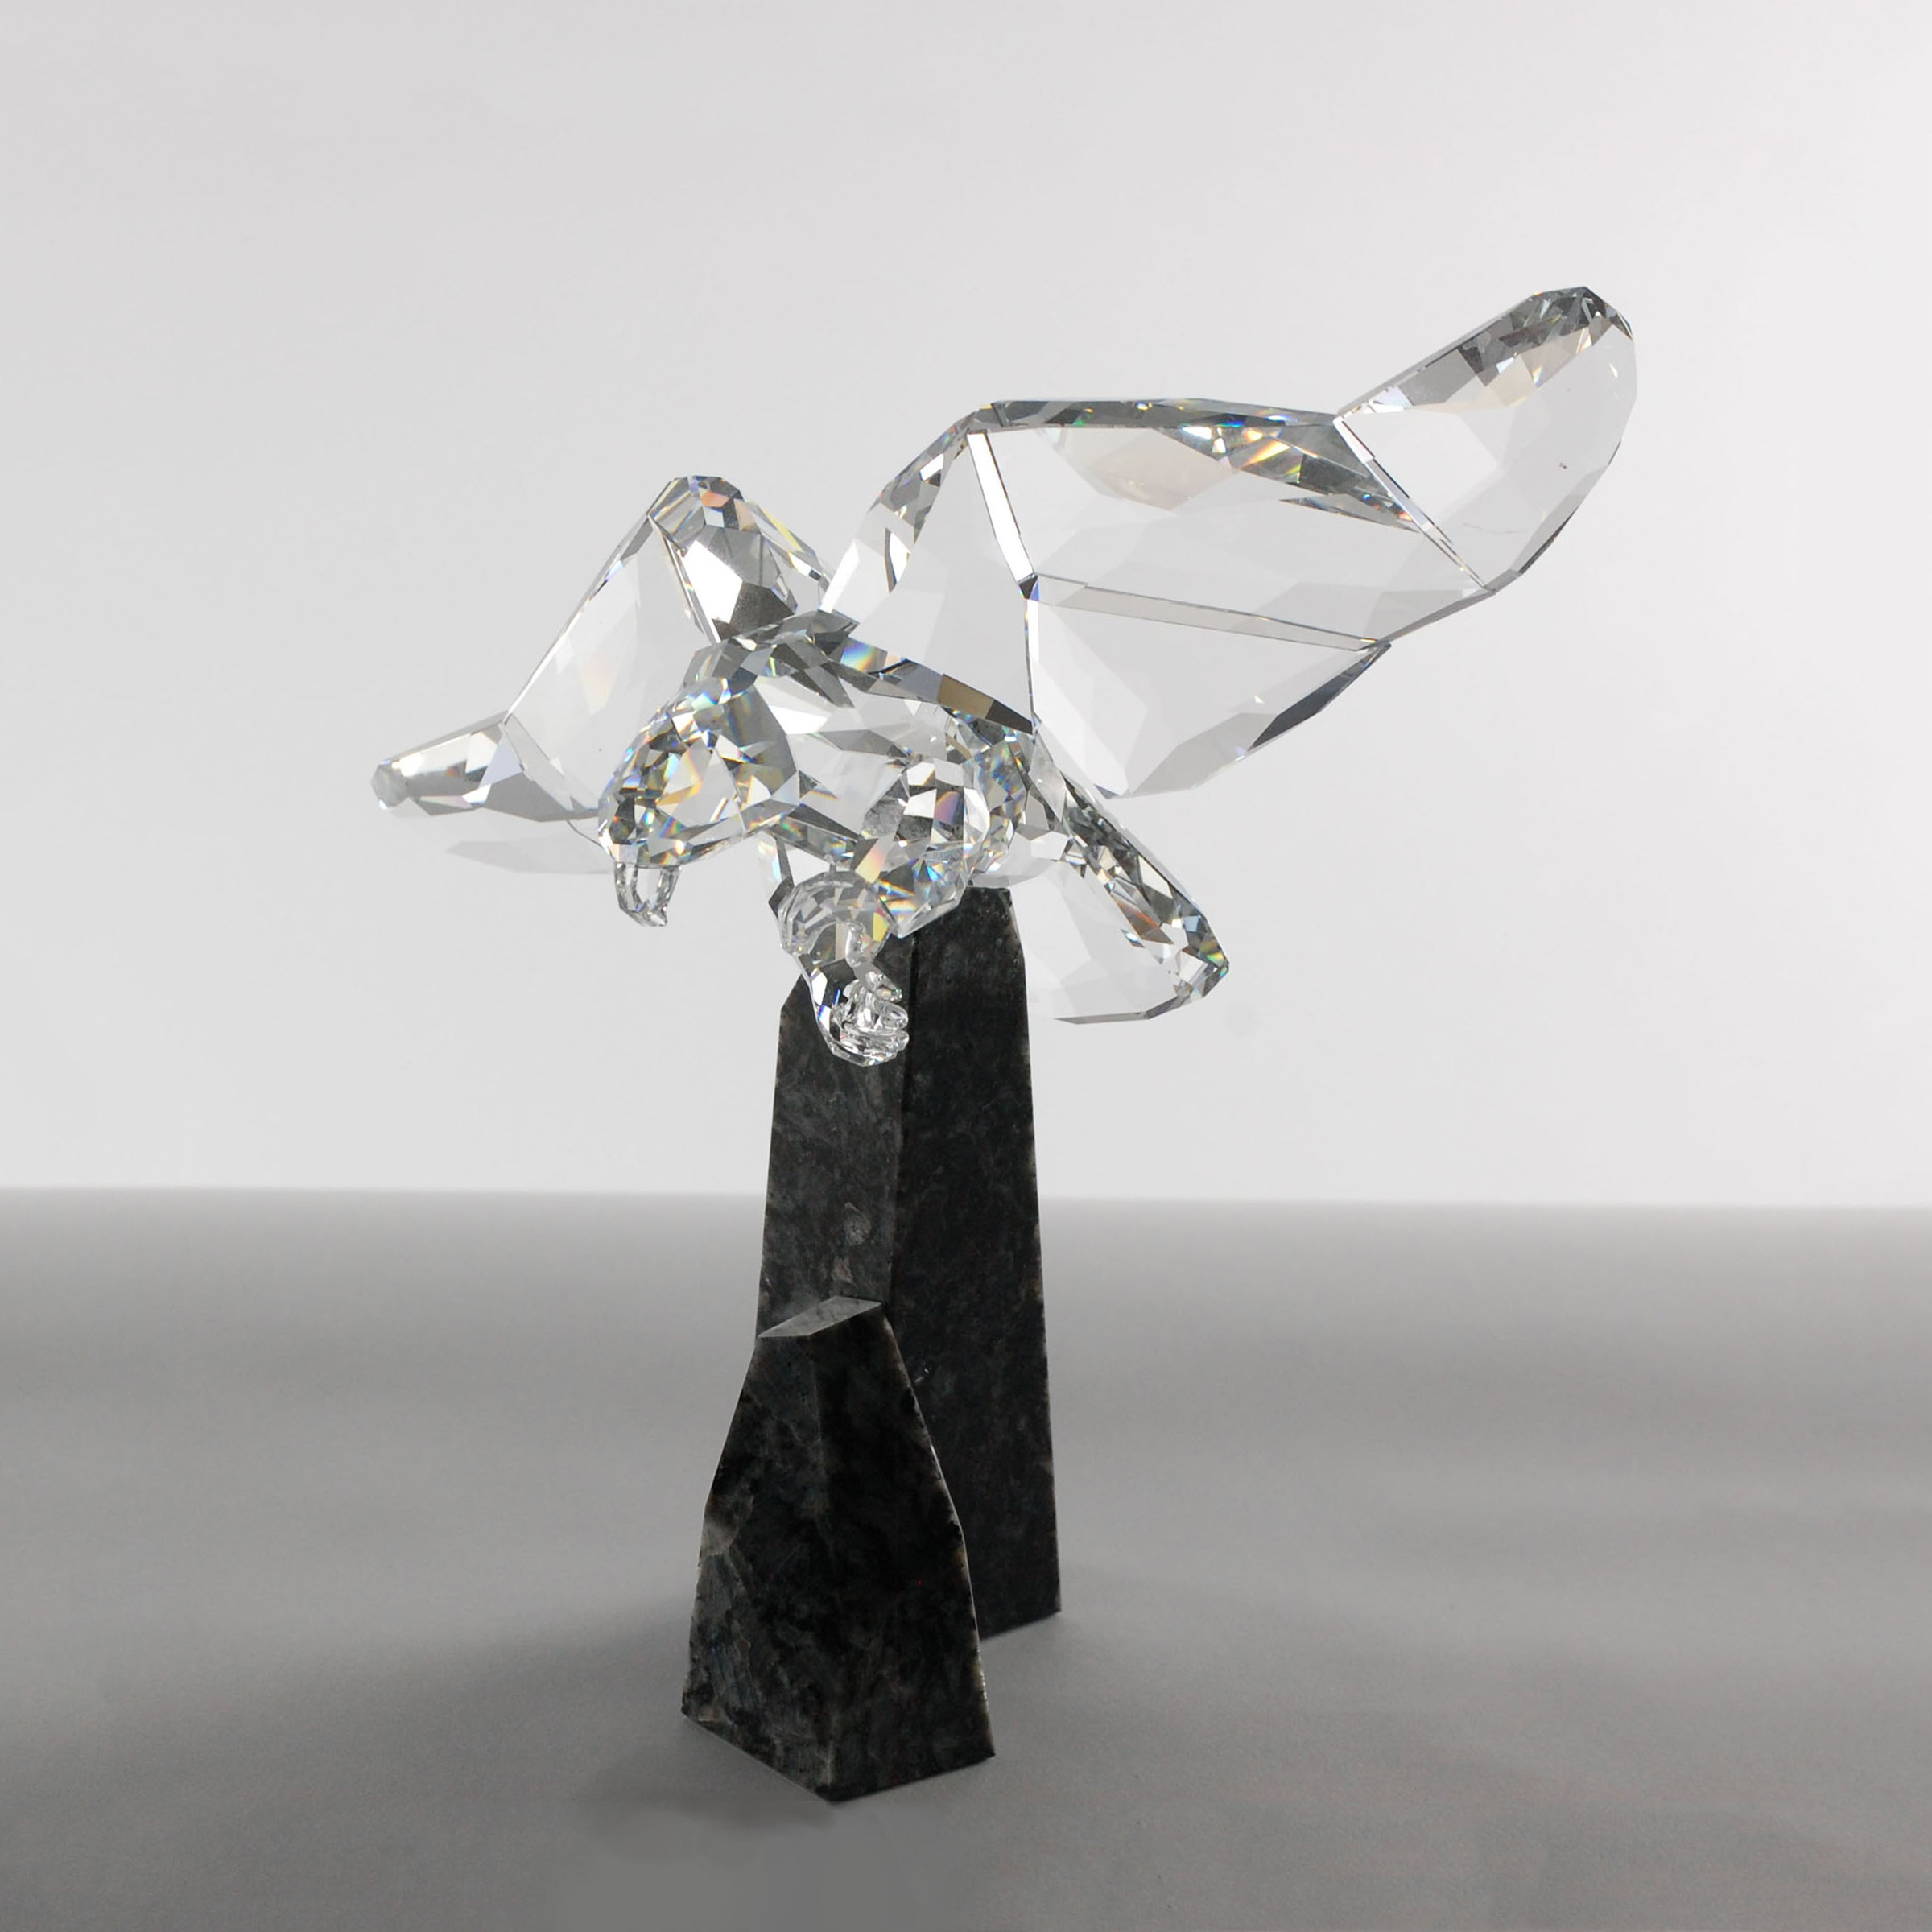 Swarovski Crystal ‘Wings of Liberty’ Eagle, early 21st century